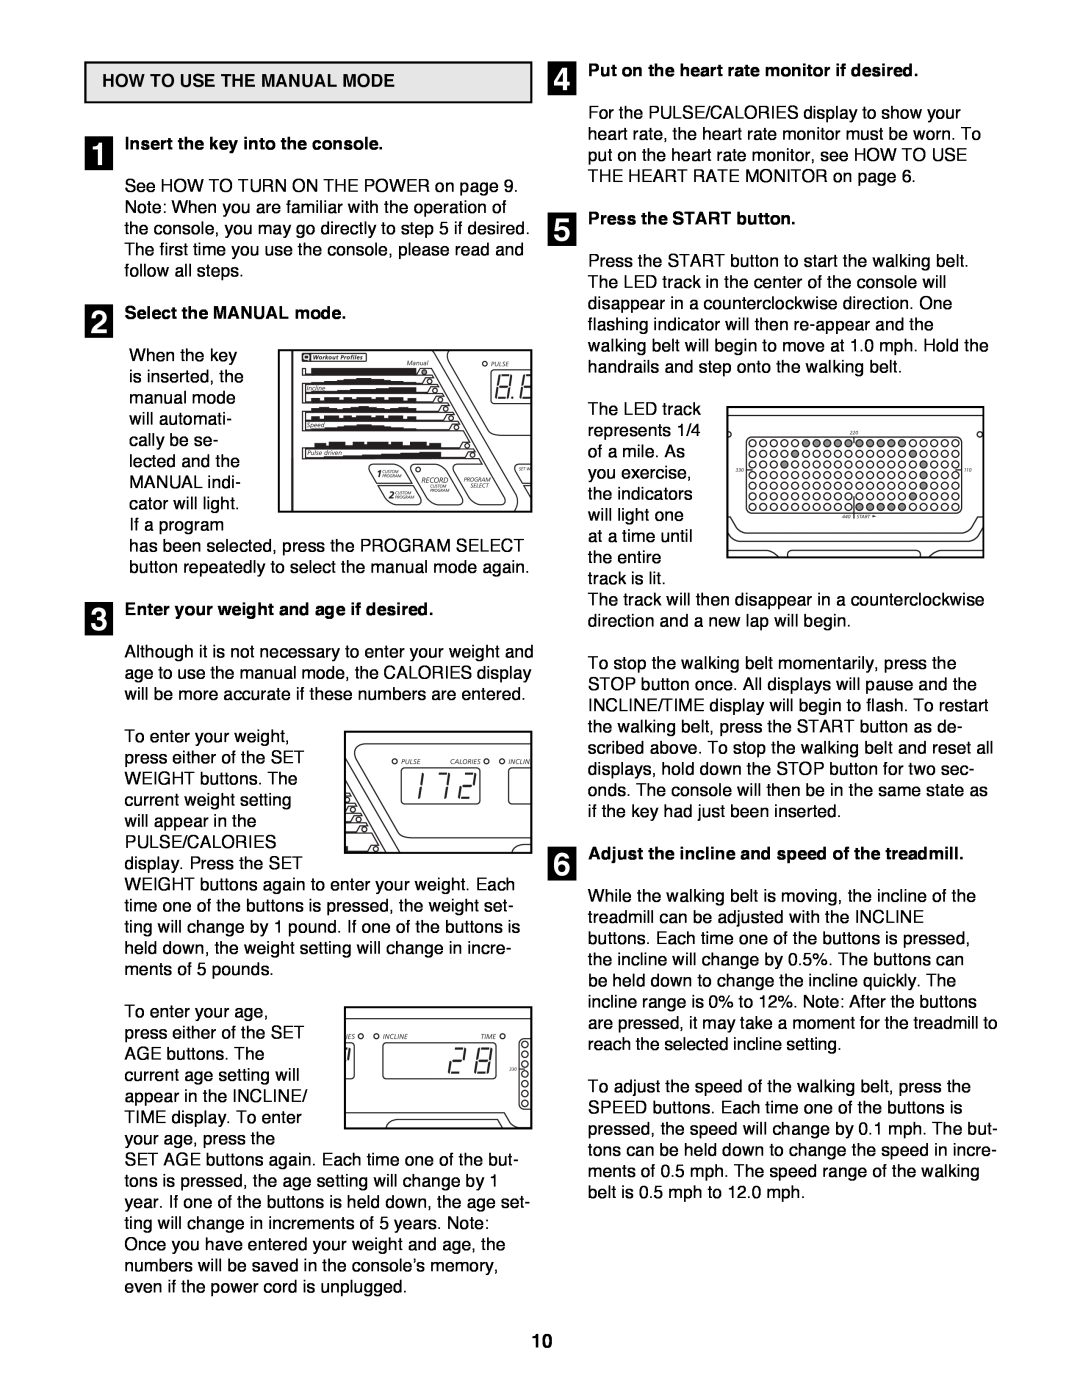 Image 831.297572 user manual HOW TO USE THE MANUAL MODE 1 Insert the key into the console, Select the MANUAL mode 